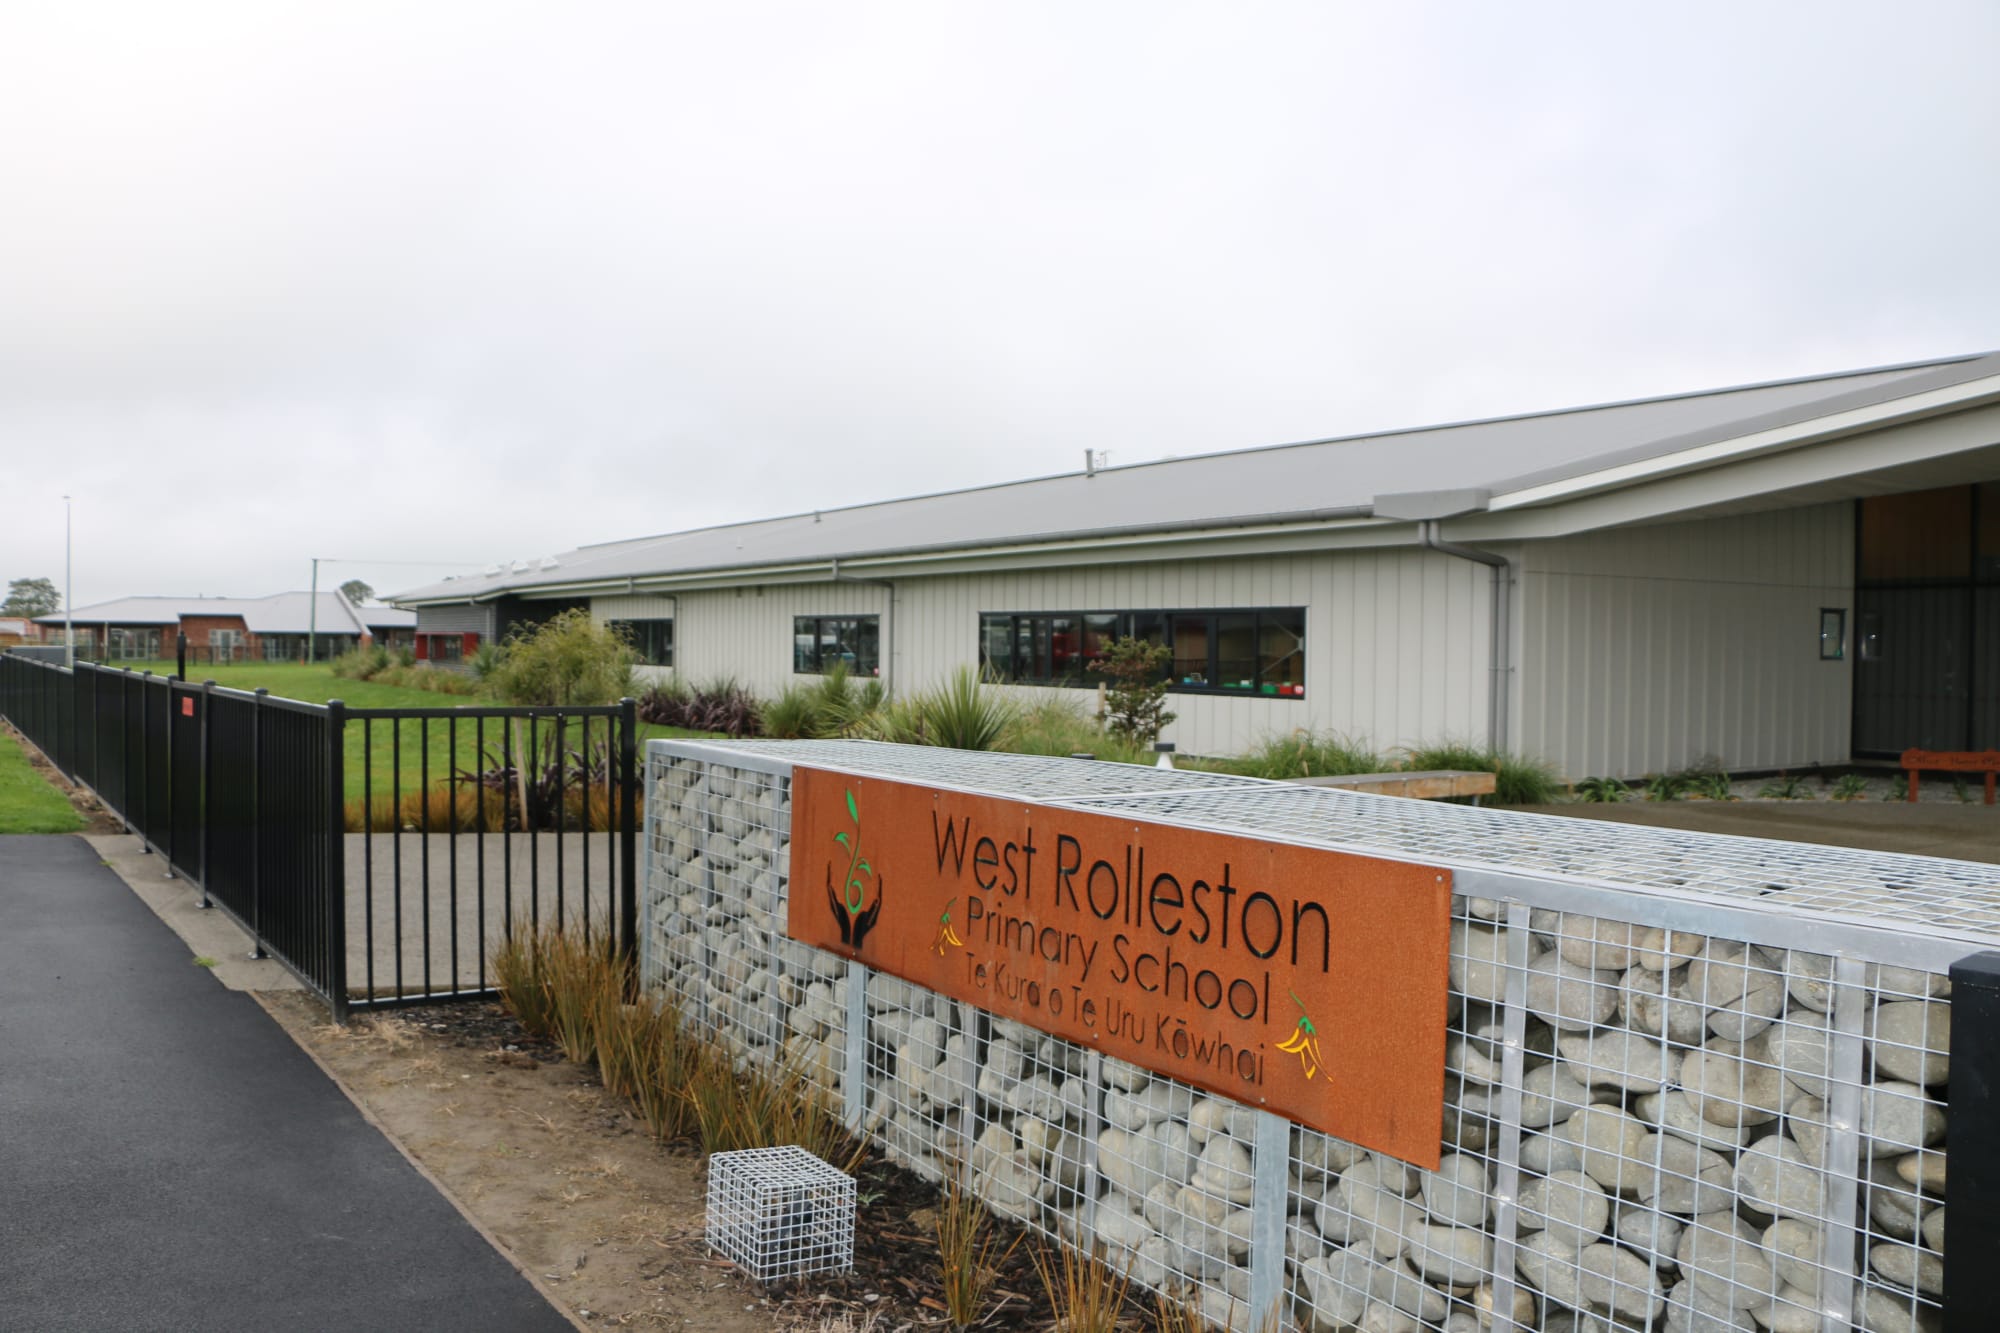 West Rolleston Primary School opened at the beginning of 2016 - one of four primary schools catering to the growing population